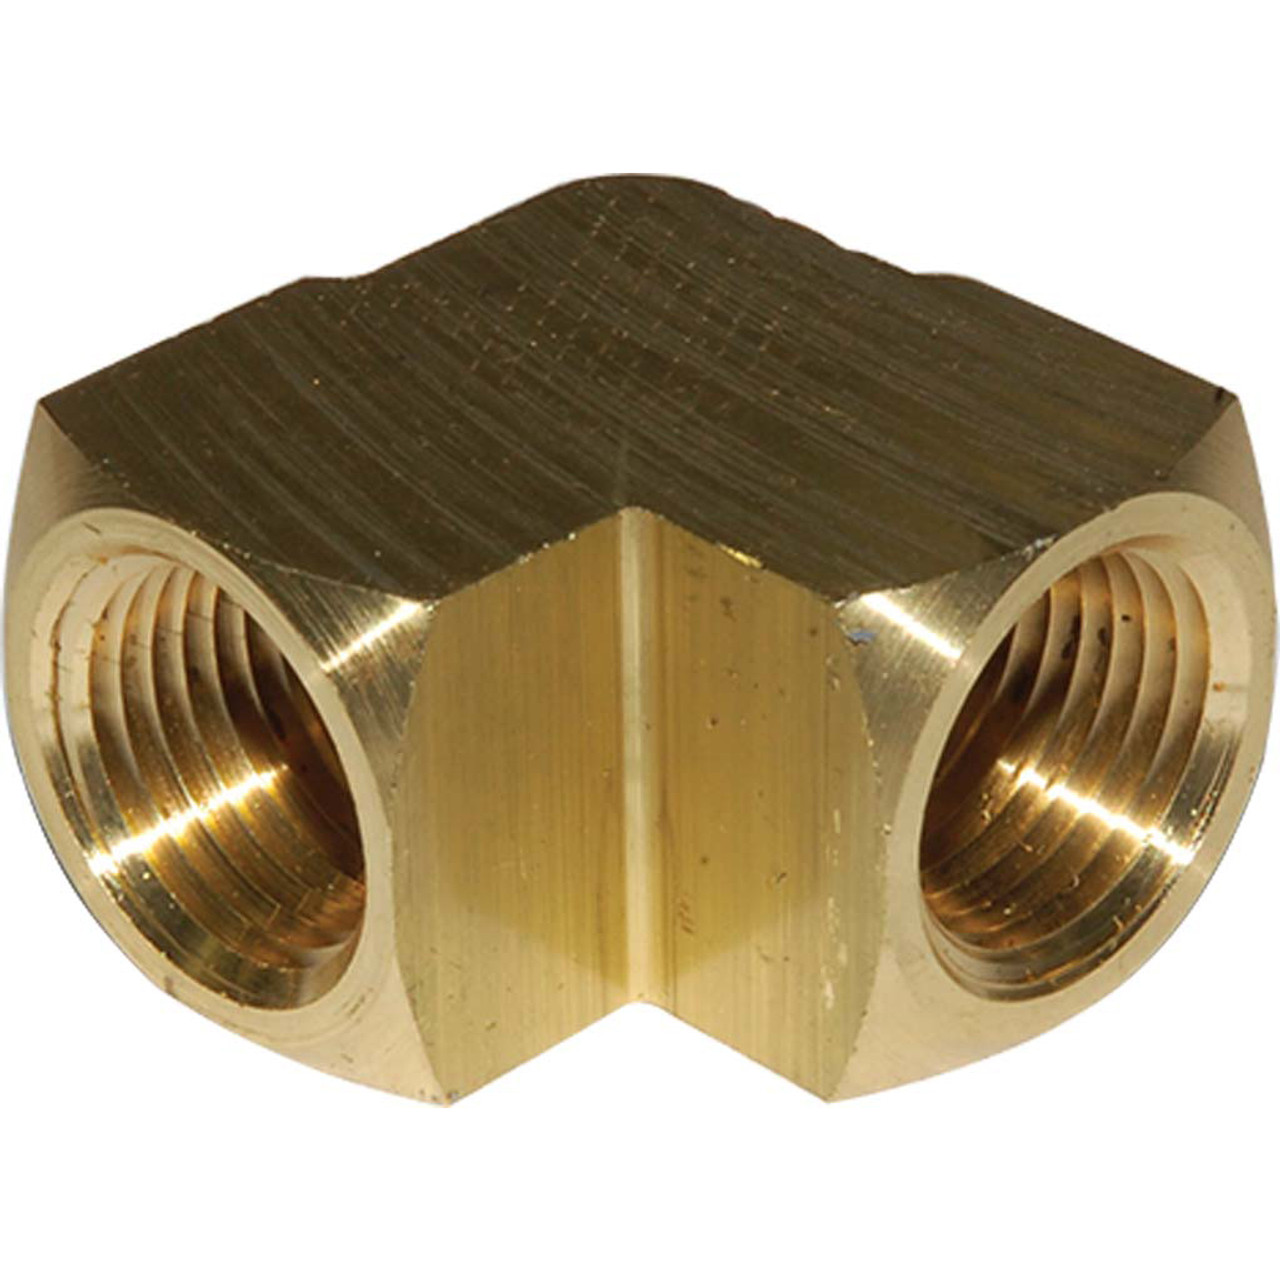 https://cdn11.bigcommerce.com/s-scmrv6kkrz/images/stencil/1280x1280/products/183461/156544/1-2-fpt-brass-pipe-9-elbow-3500x8__01965.1568390053.jpg?c=2